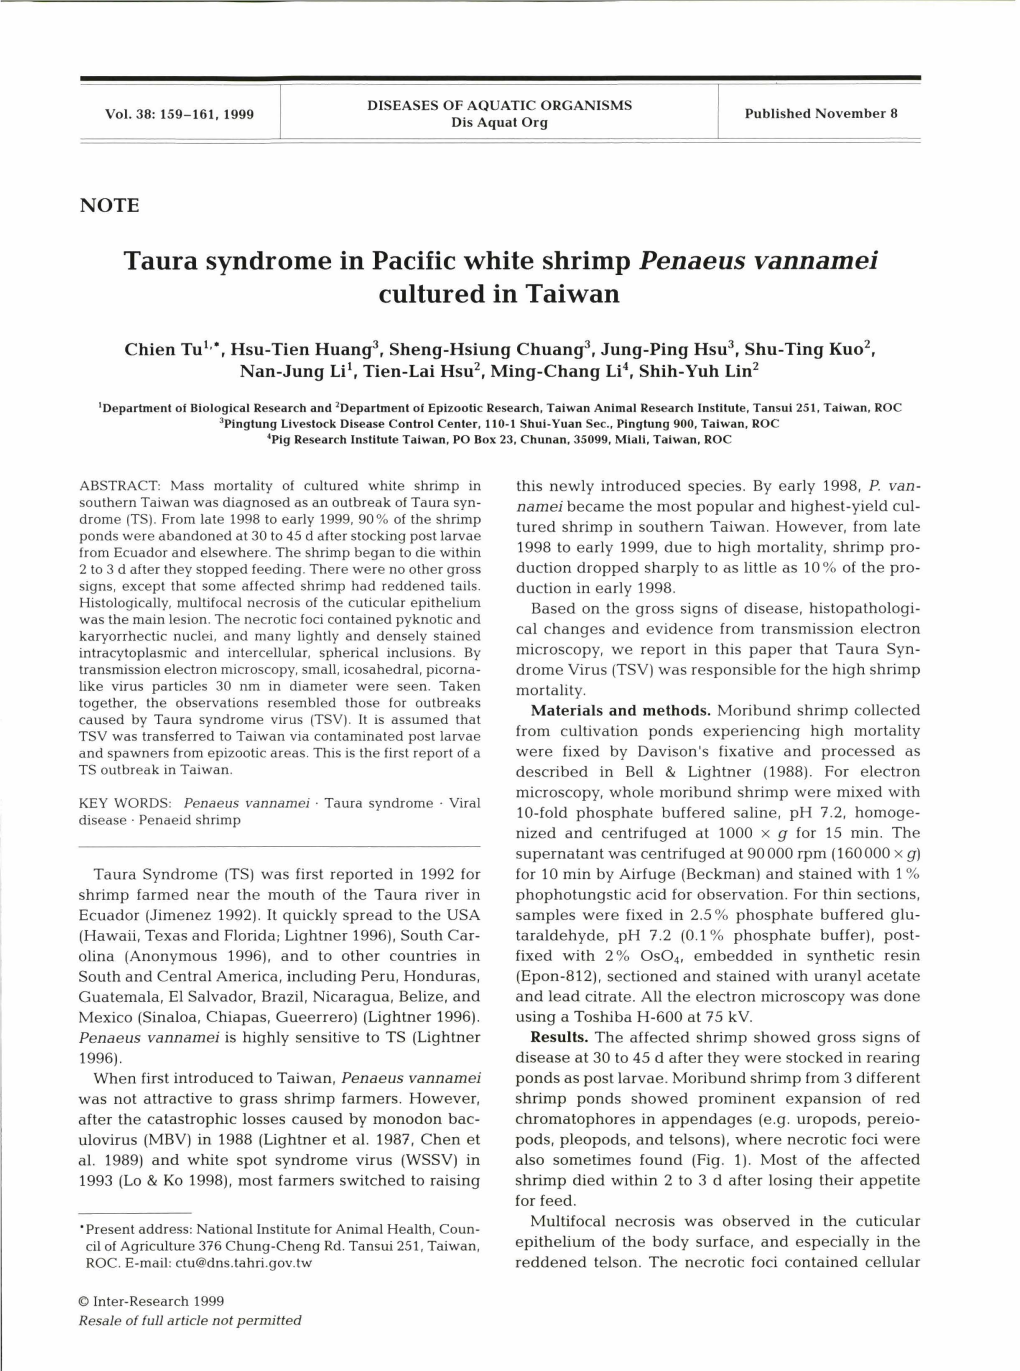 Taura Syndrome in Pacific White Shrimp Penaeus Vannamei Cultured in Taiwan